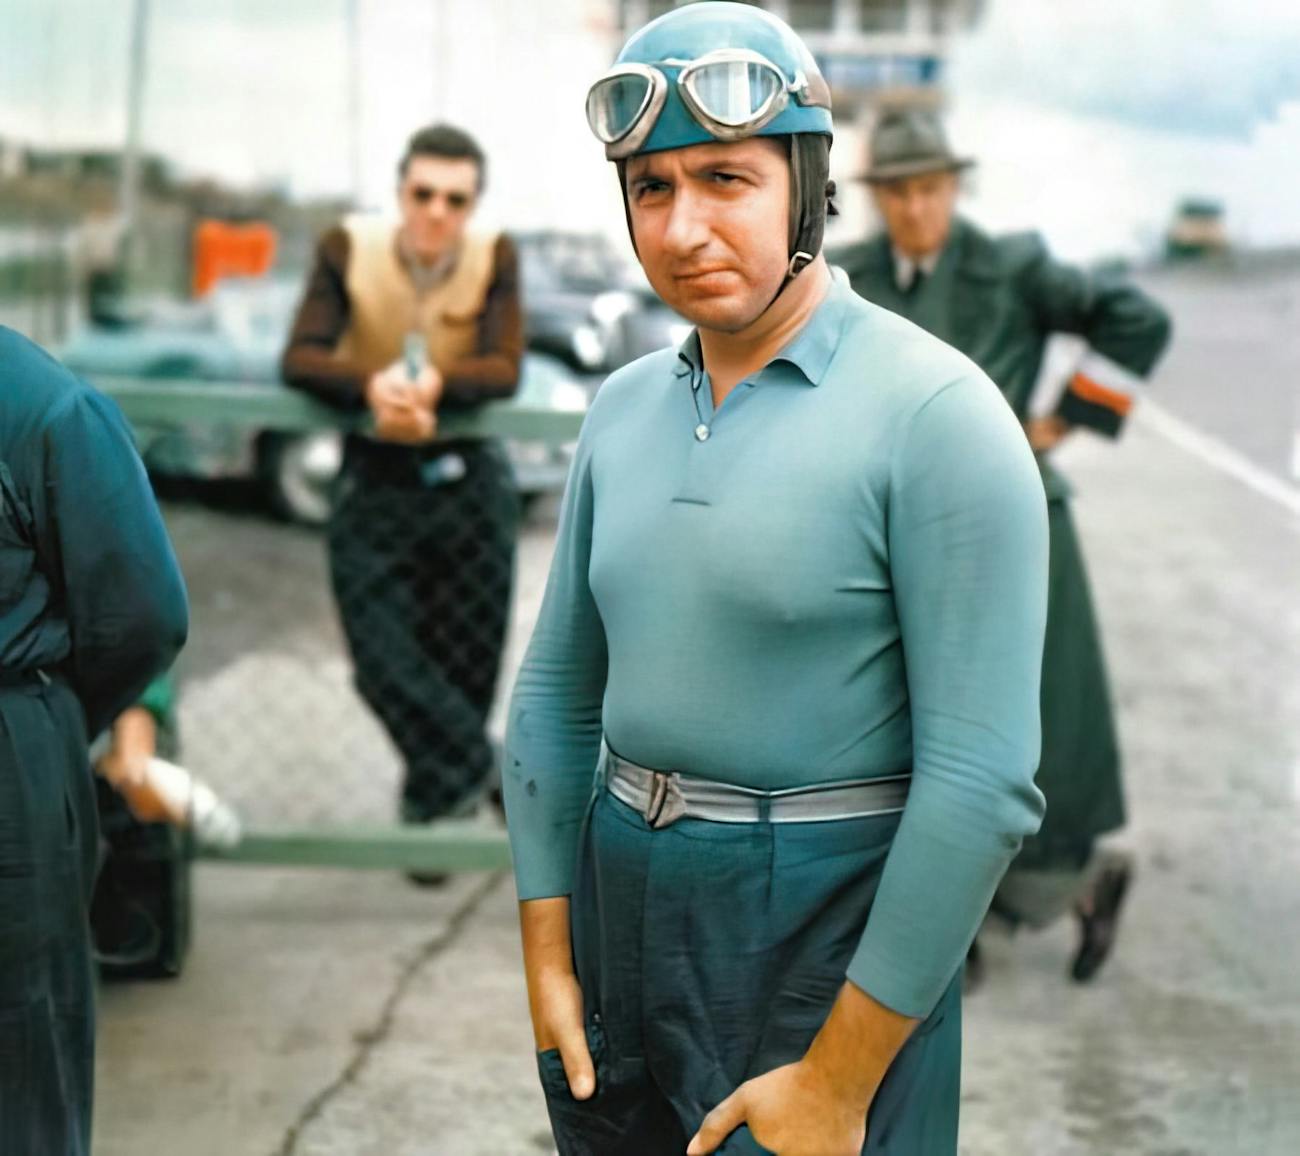 Alberto Ascari in light blue driver's clothing and helmet